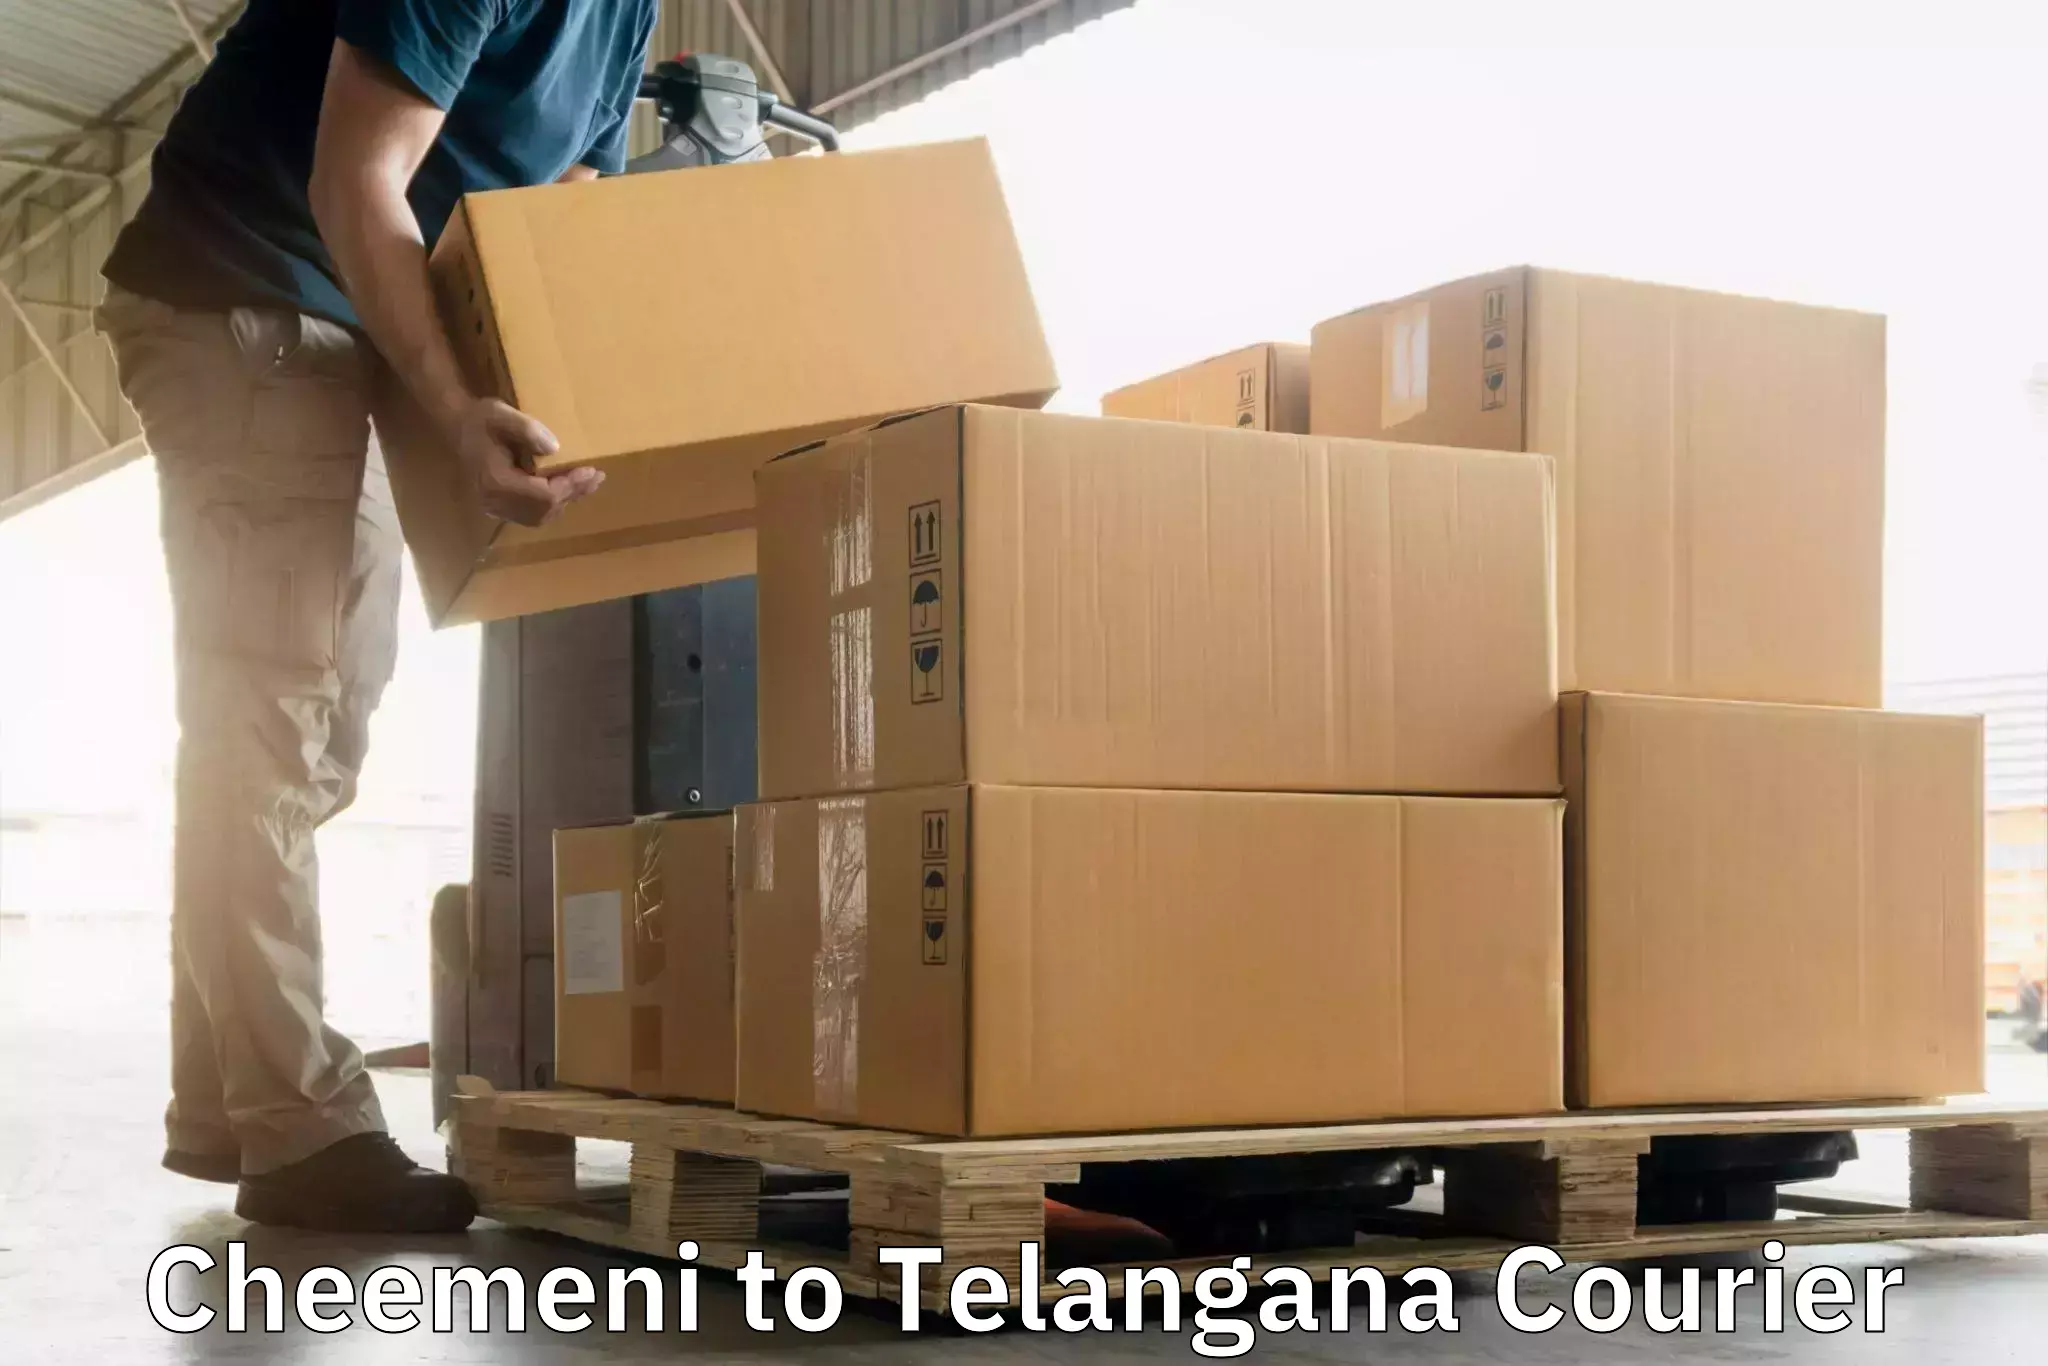 Parcel delivery automation in Cheemeni to Patancheru